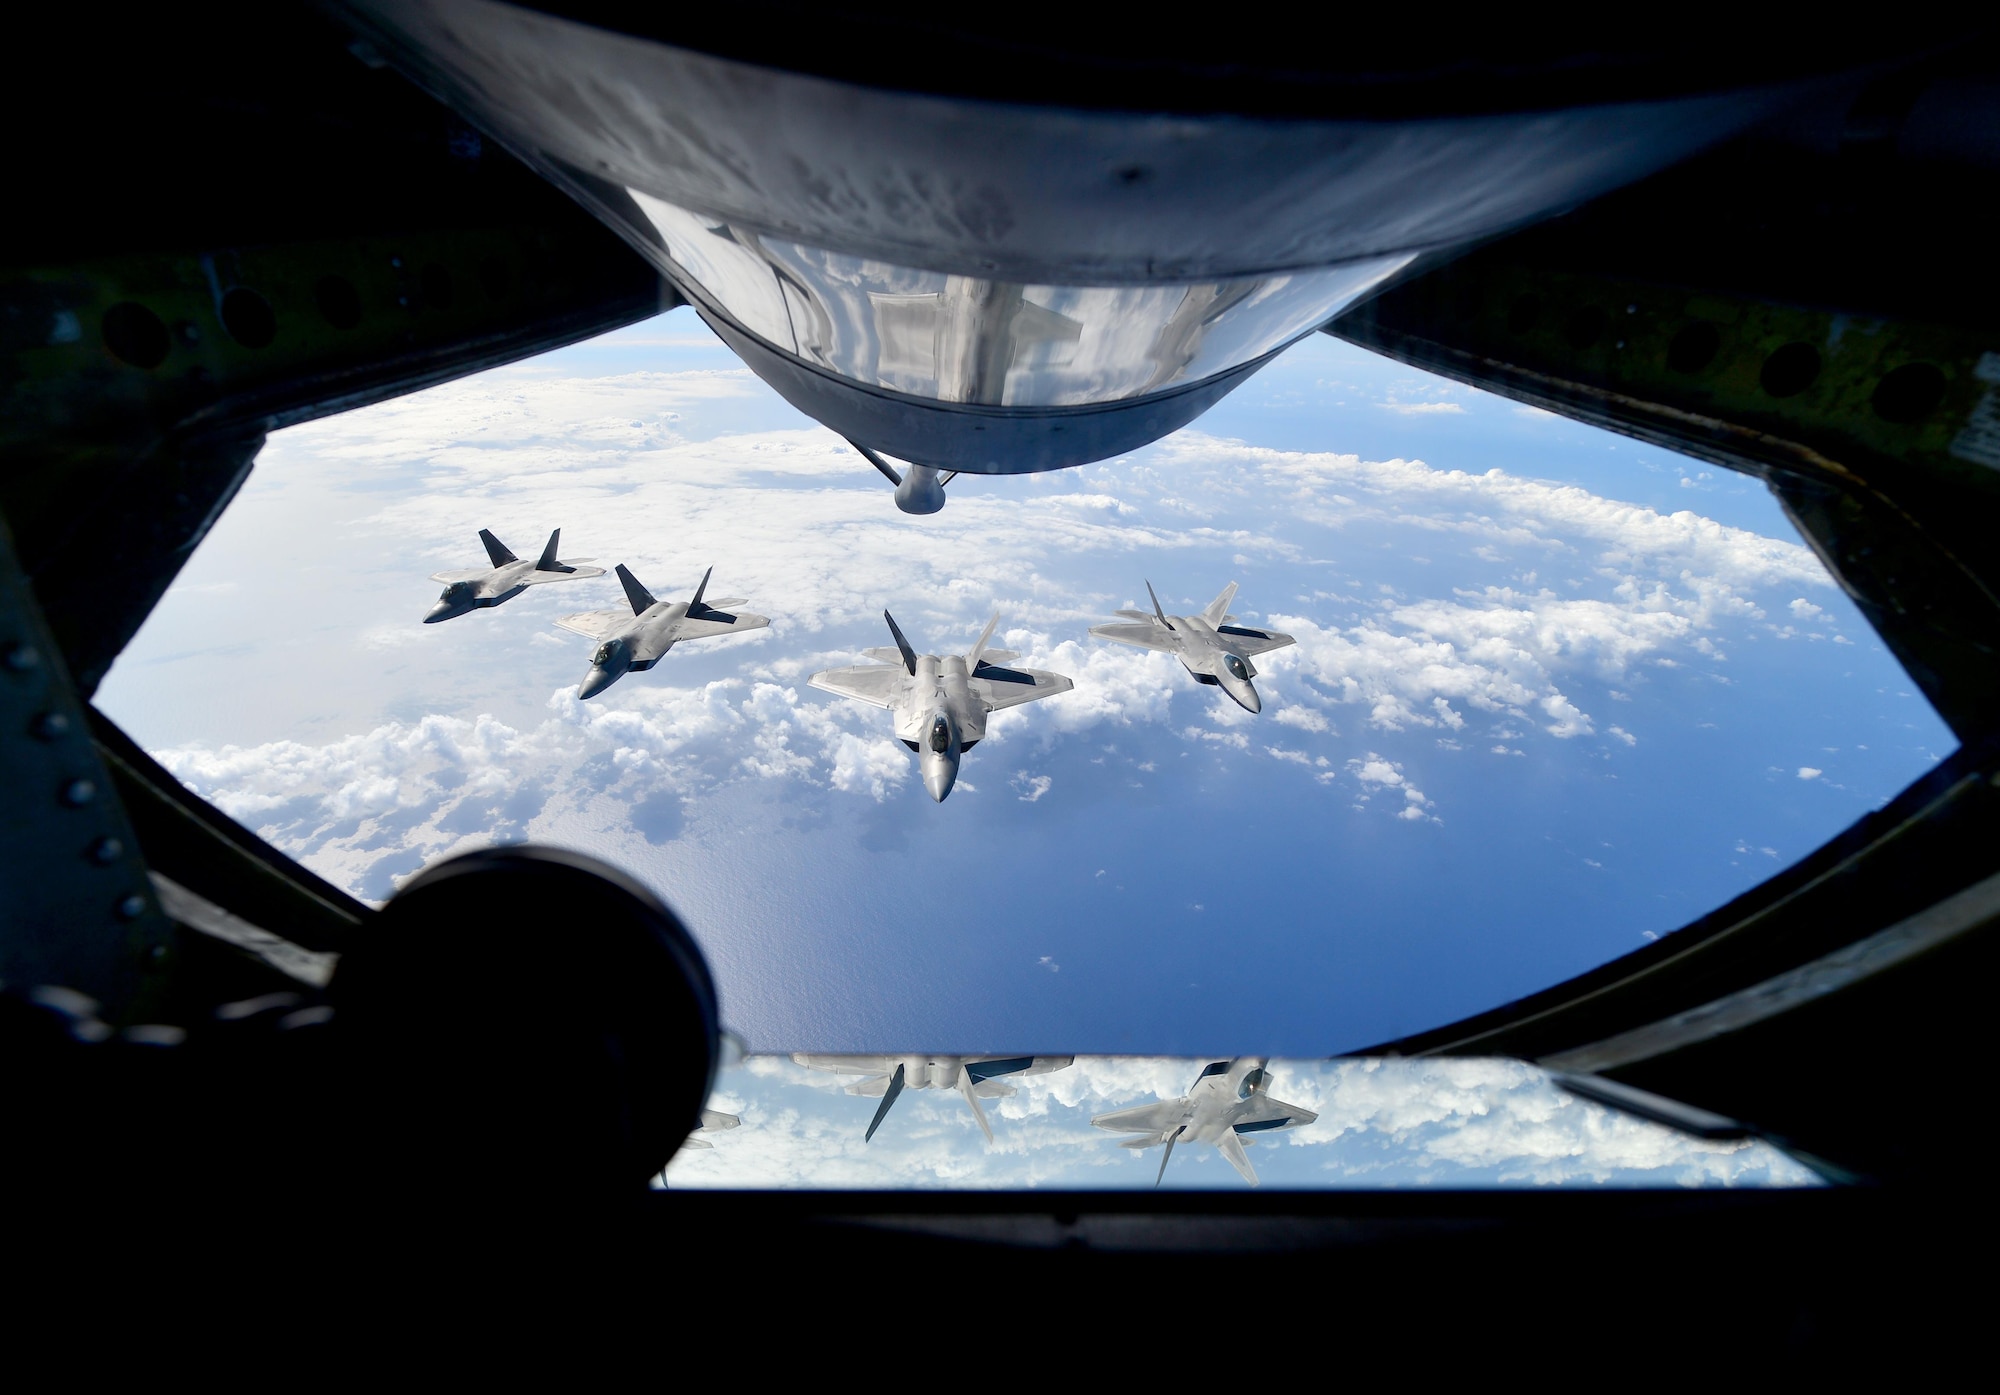 A view from the refueling pod of a KC-135R operated by Citizen Airmen from the 465th Air Refueling Squadron at Tinker Air Force Base, Oklahoma as four F-22 Raptors fly in a formation following an aerial refueling. During the flight, the Okies of the 465th ARS offloaded 42,700 lbs. of fuel to the fighters. The Hawaiian Raptors are made up of a combination of the 119th Fighter Squadron, Hawaii Air National Guard and the 19th Fighter Squadron, Joint Base Pearl Harbor Hickam. (U.S. Air Force photo by Tech. Sgt. Lauren Gleason)